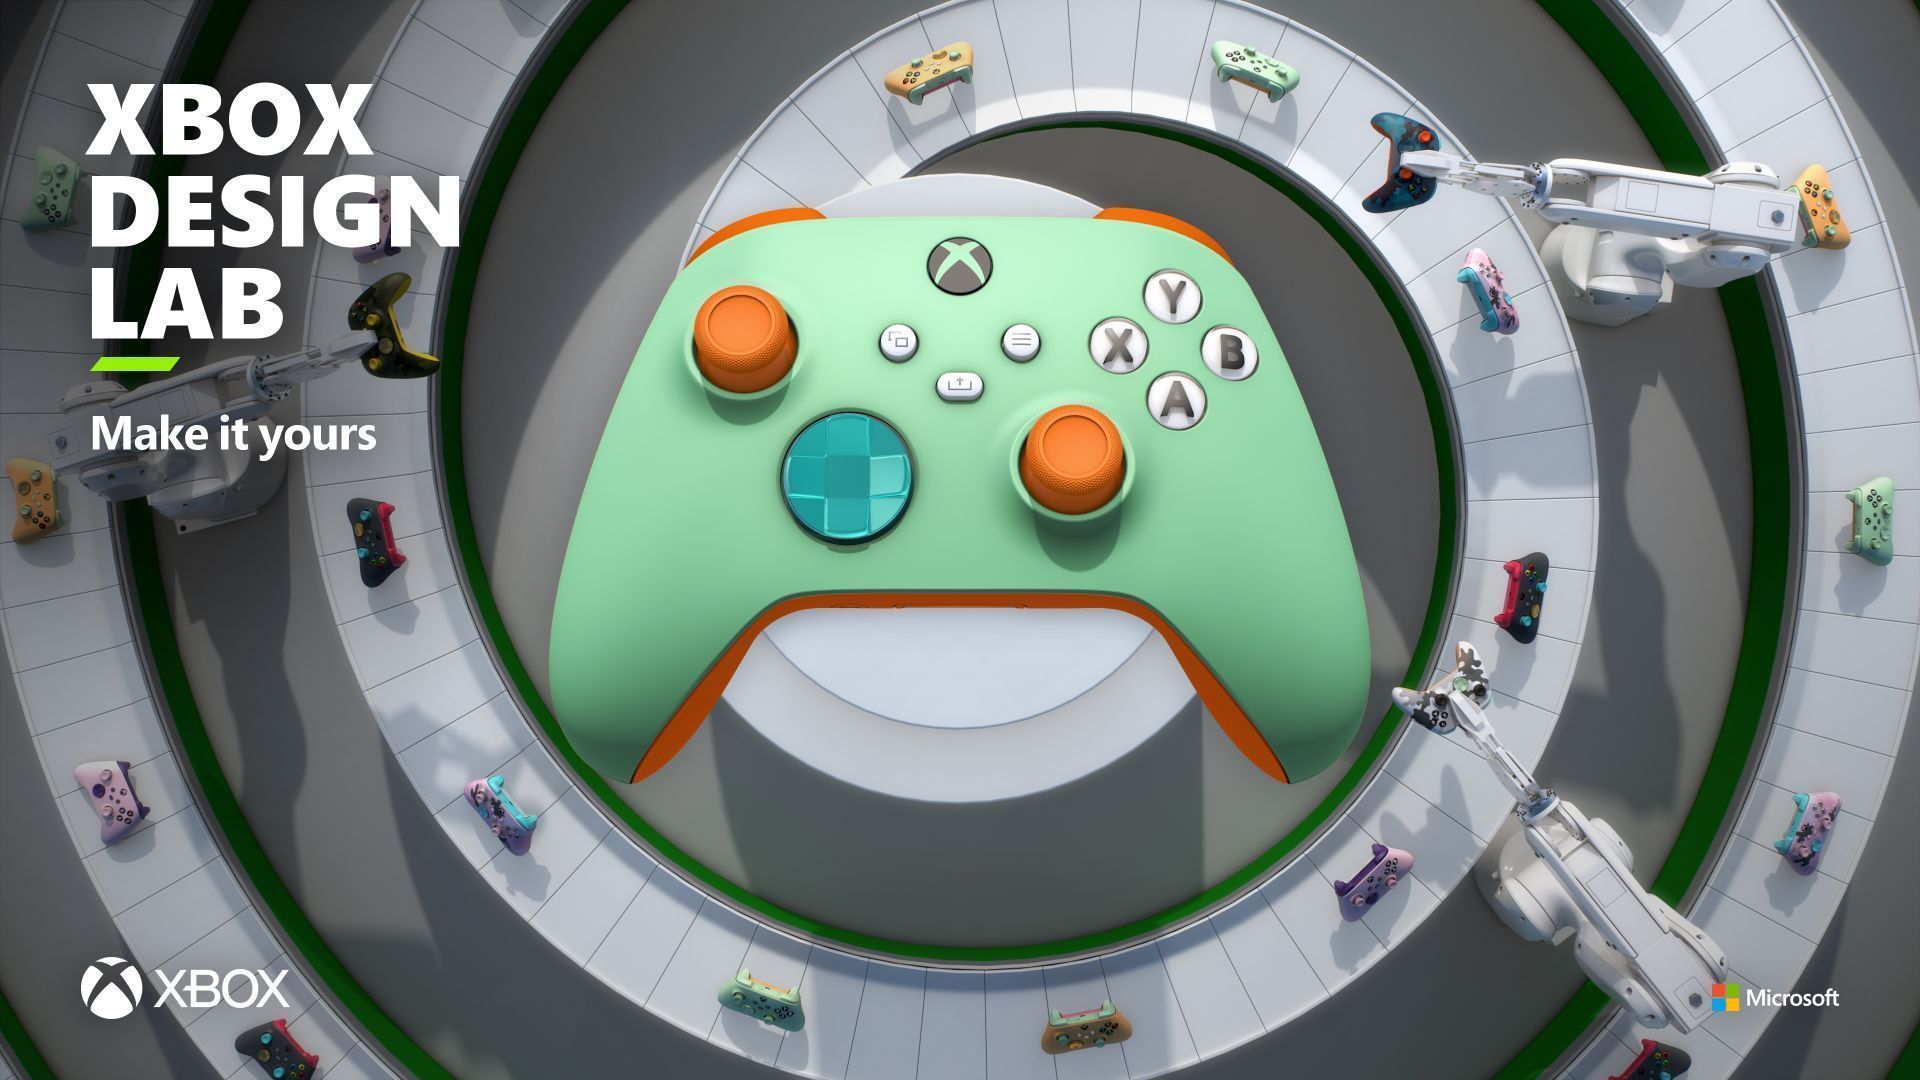 Xbox TV app enables cloud gaming on smart TVs starting this June